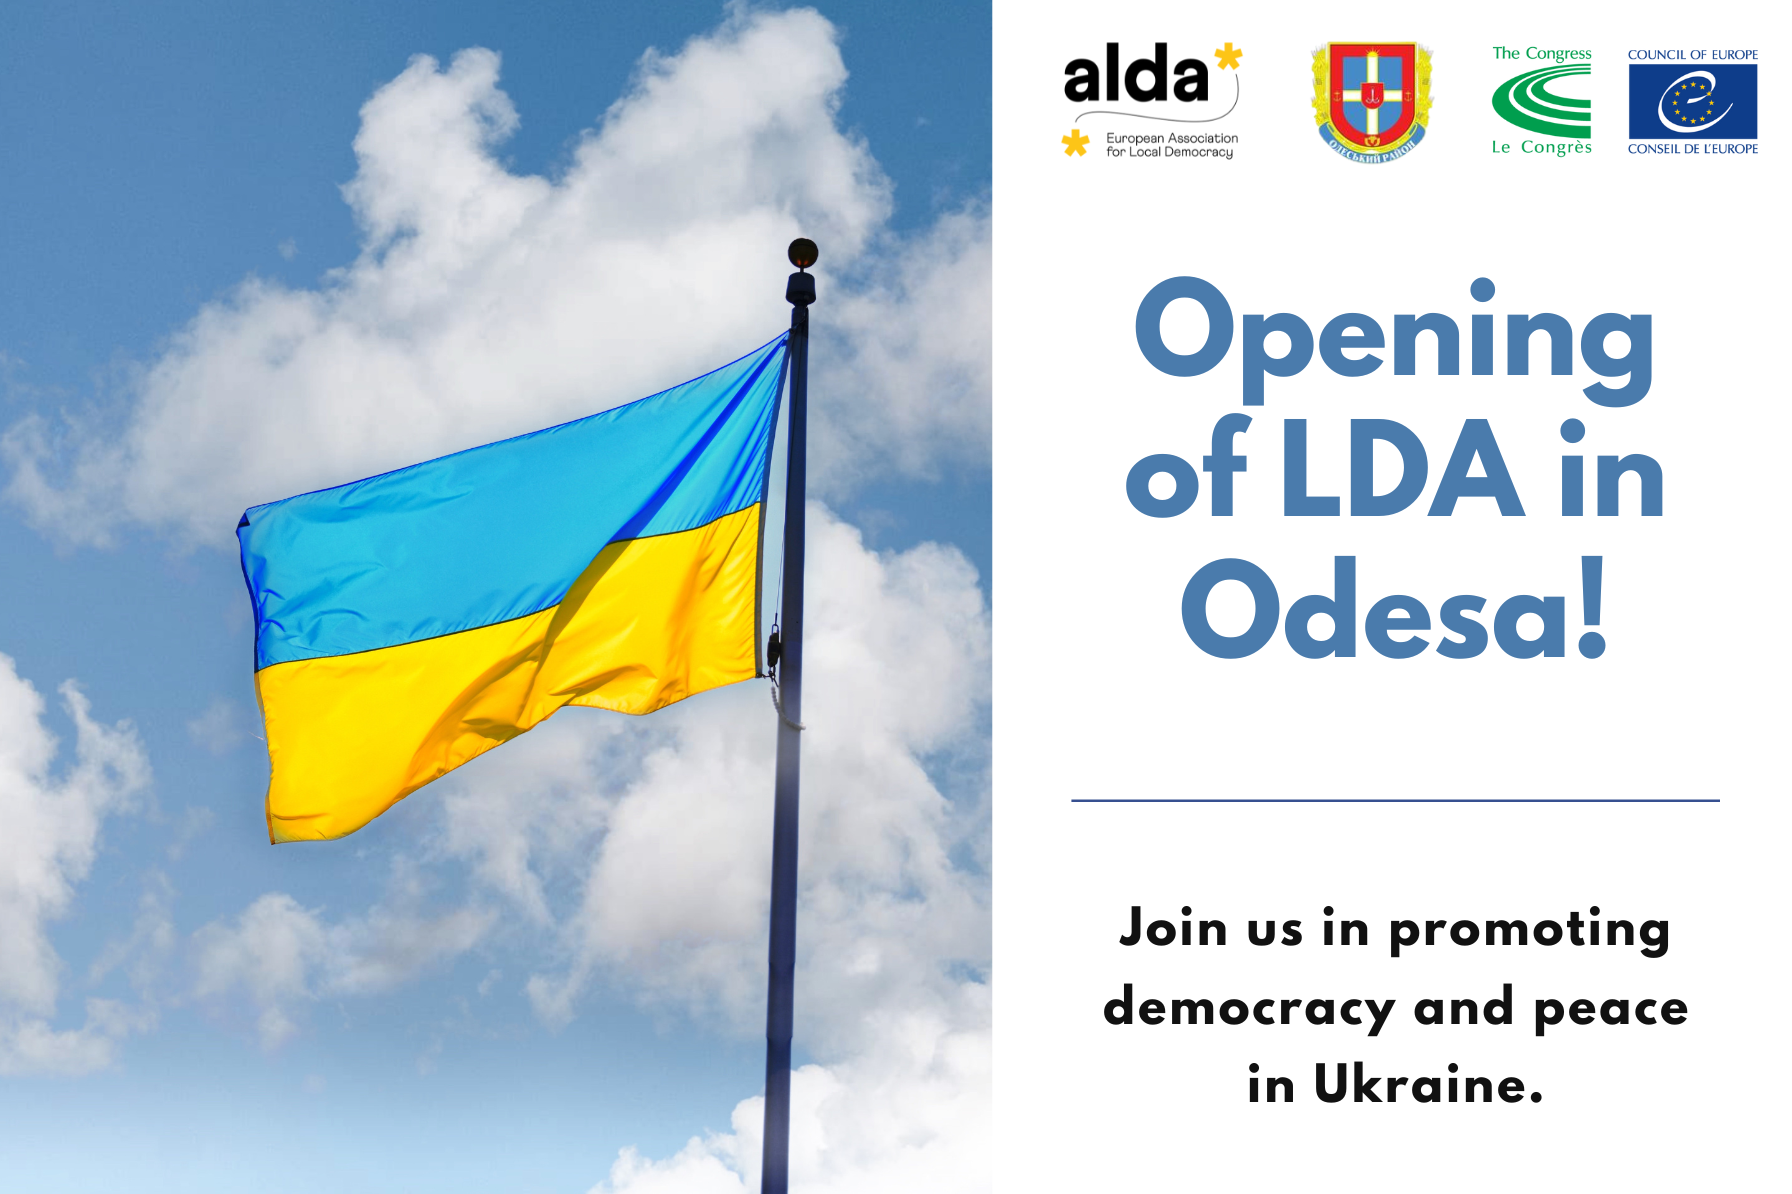 A New Beginning: Local Democracy Agency Odesa Opens its Doors